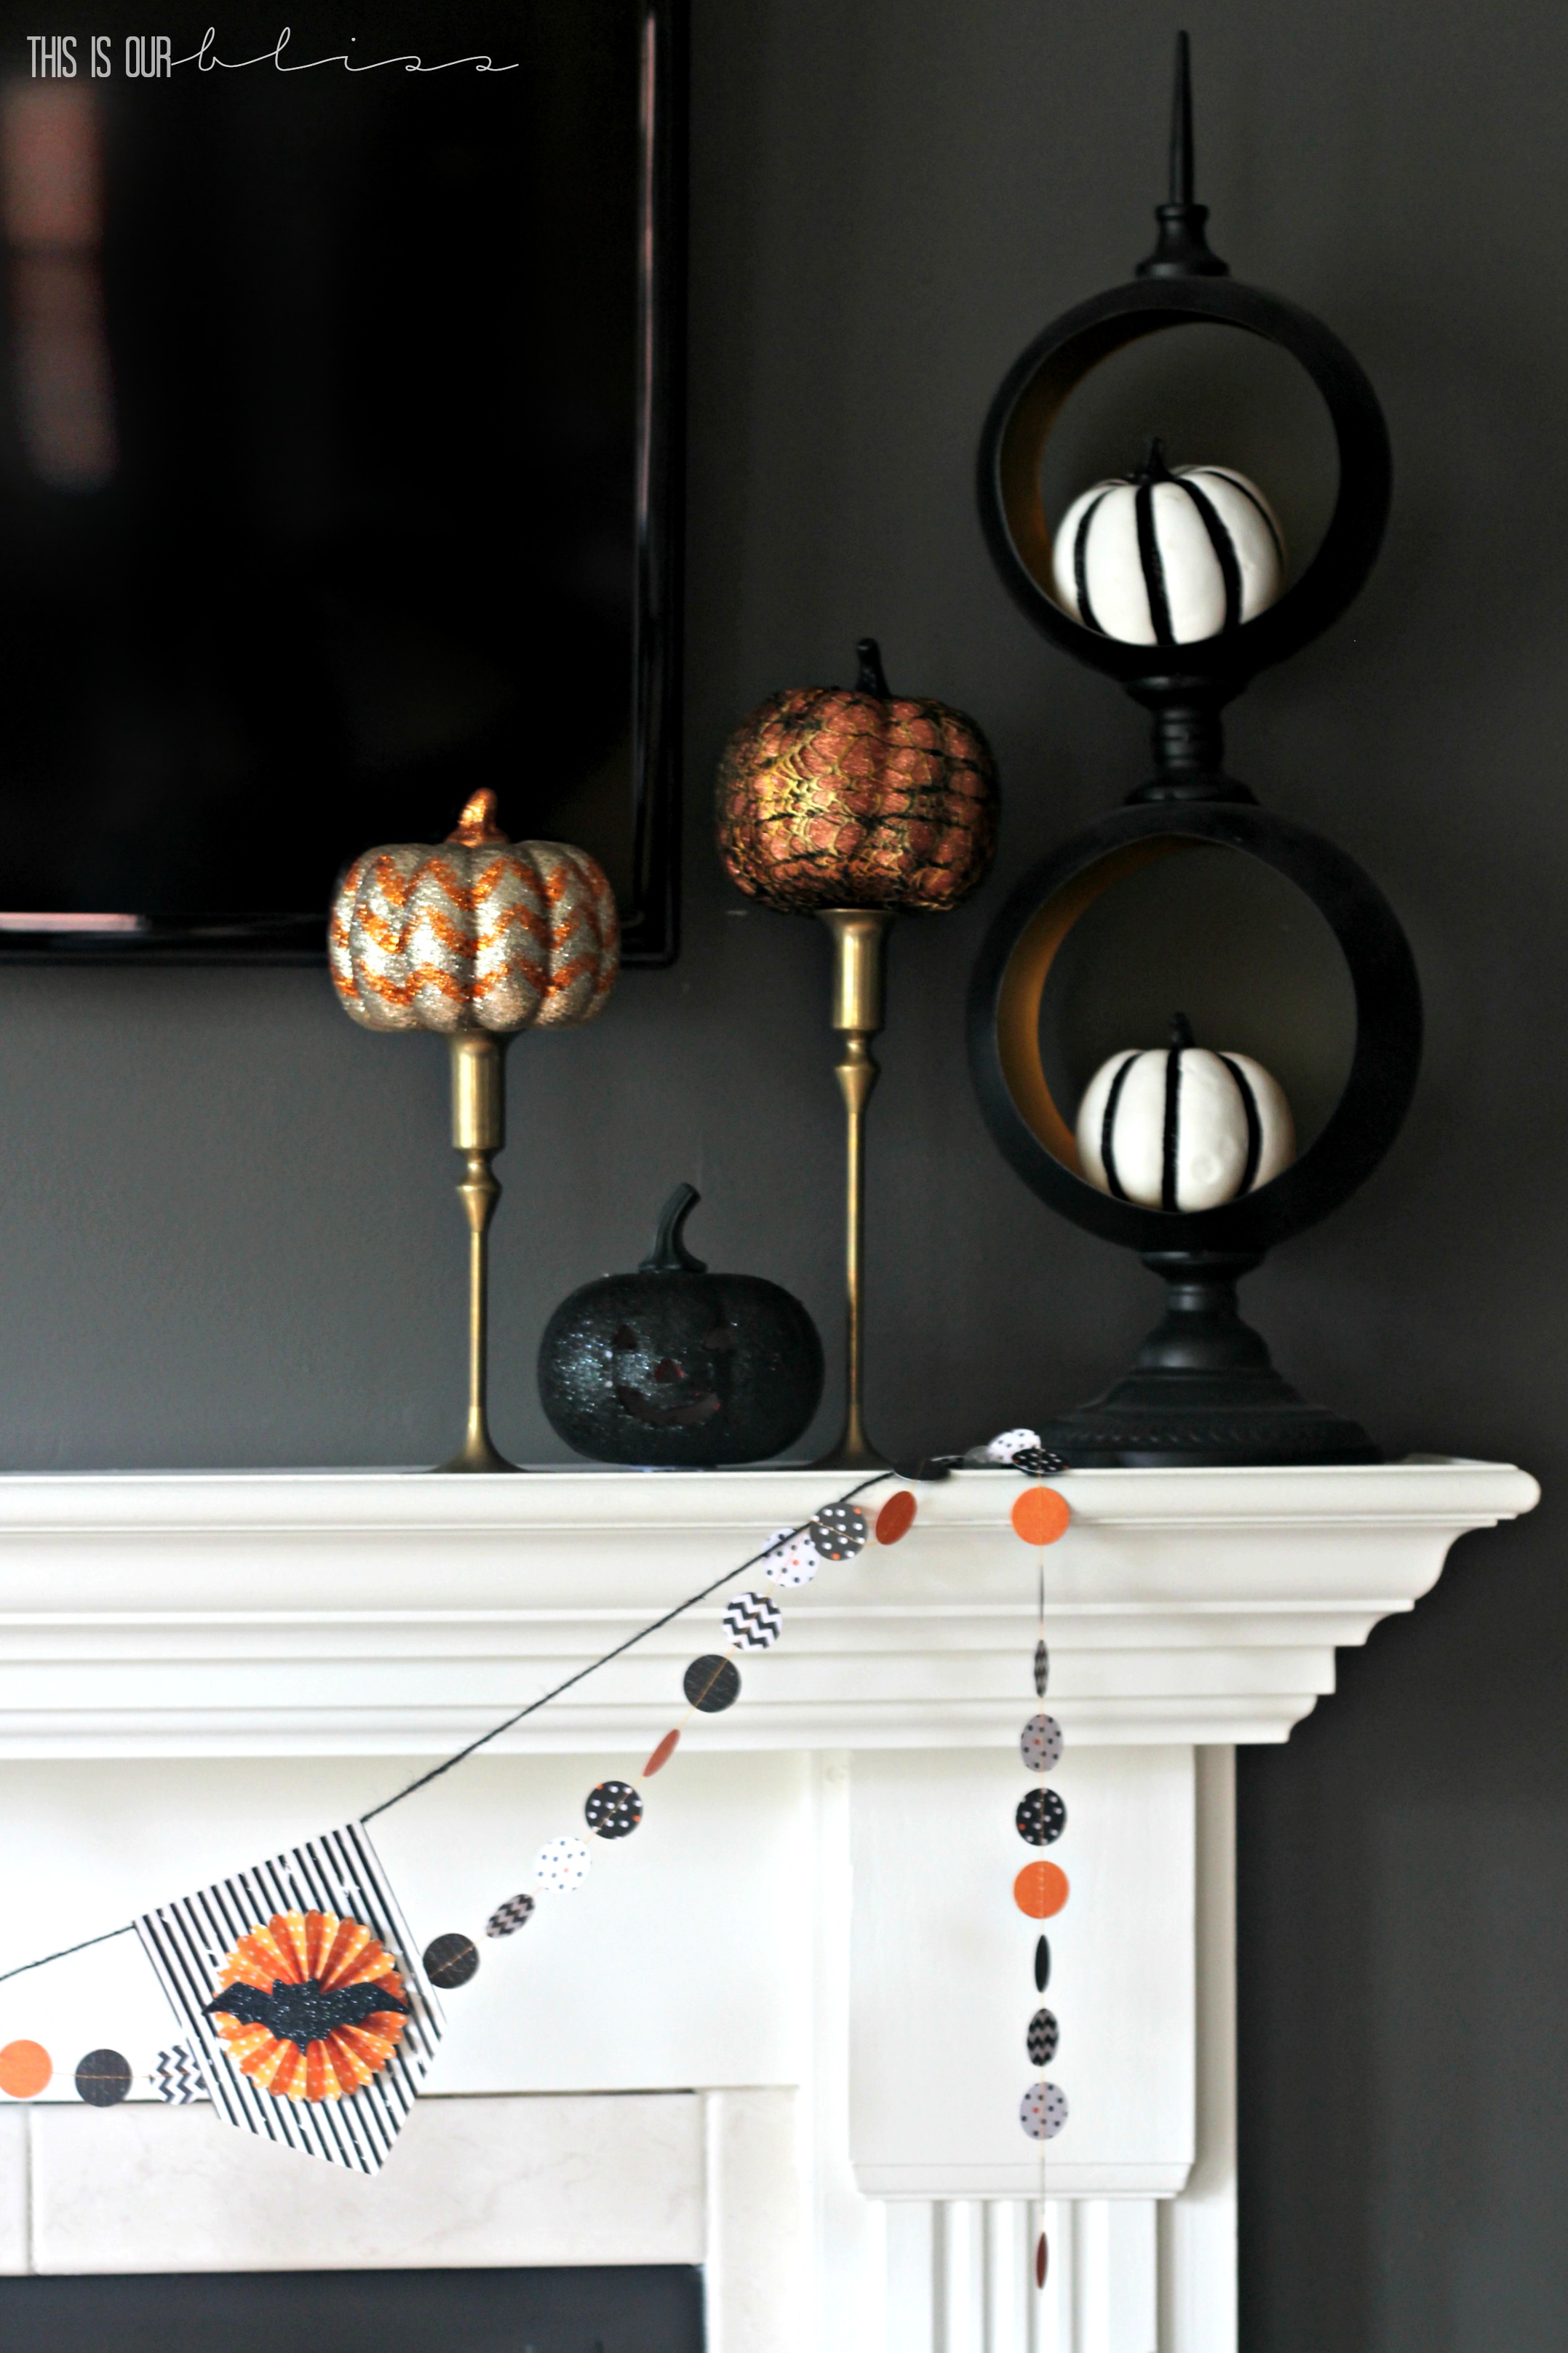 https://thisisourbliss.com/wp-content/uploads/2016/10/Last-minute-simple-halloween-mantel-This-is-our-Bliss-www.thisisourbliss.com_.jpg